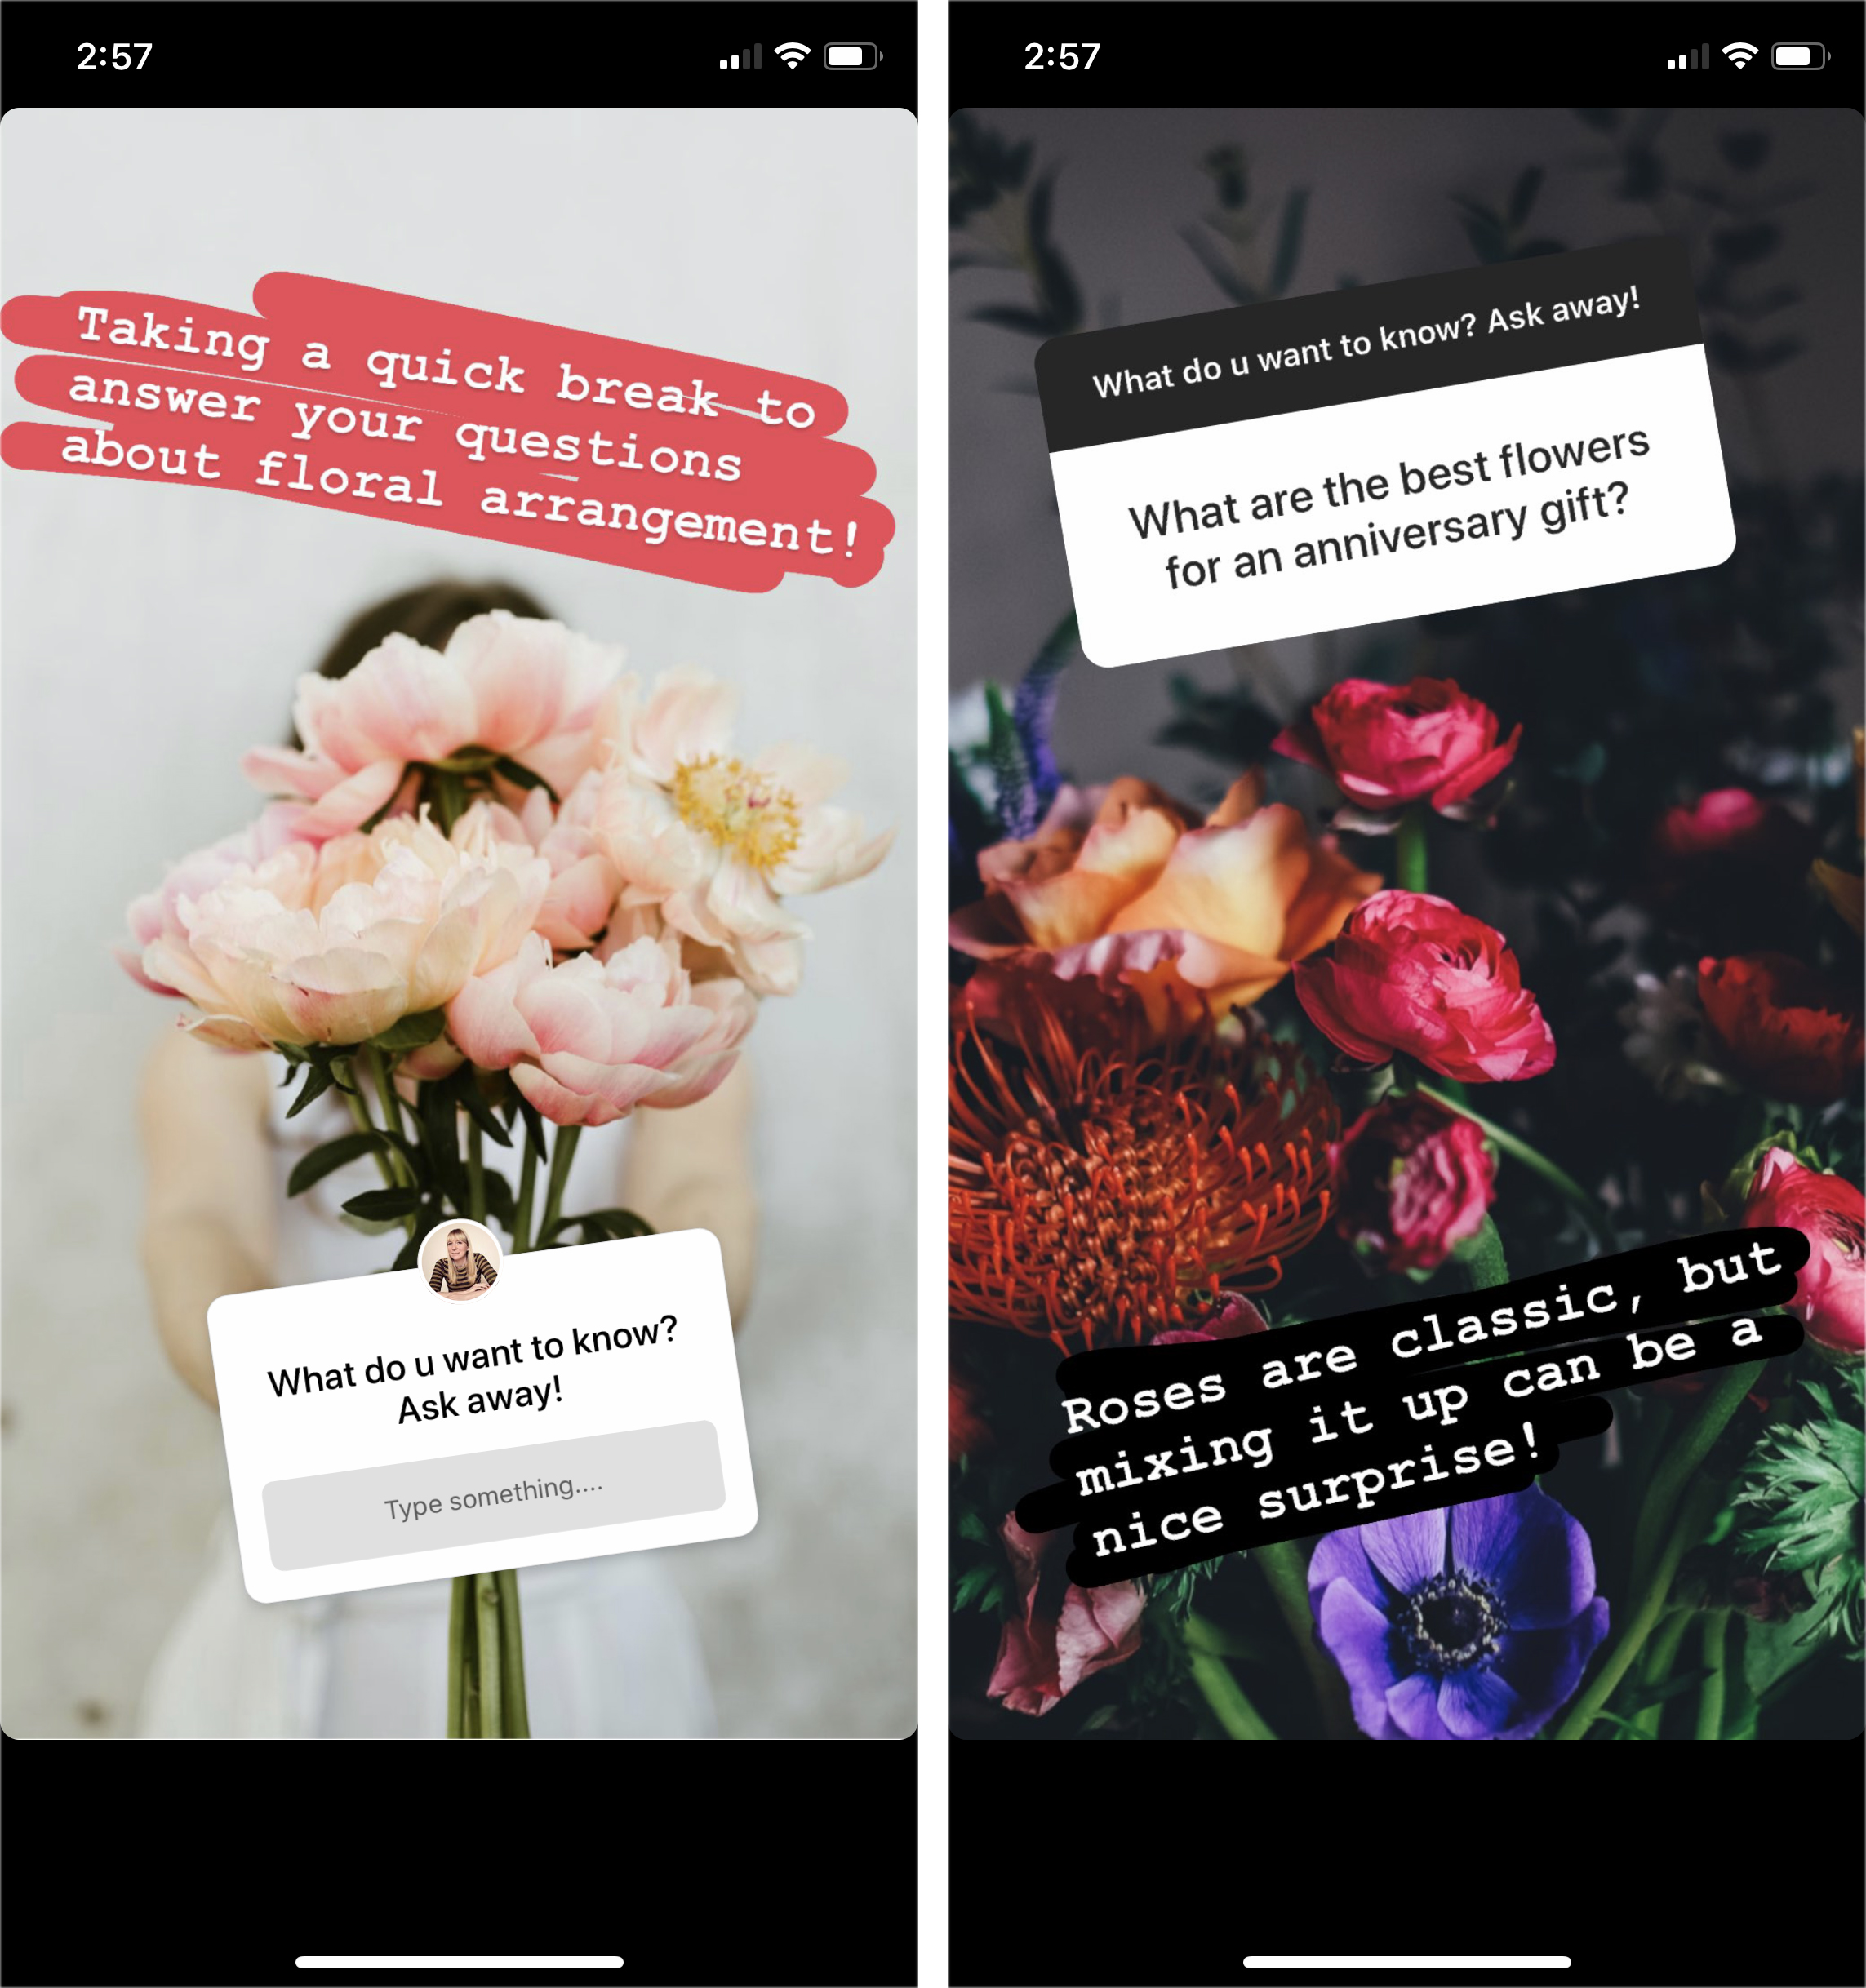 Implementing Instagram Stories for brand promotion